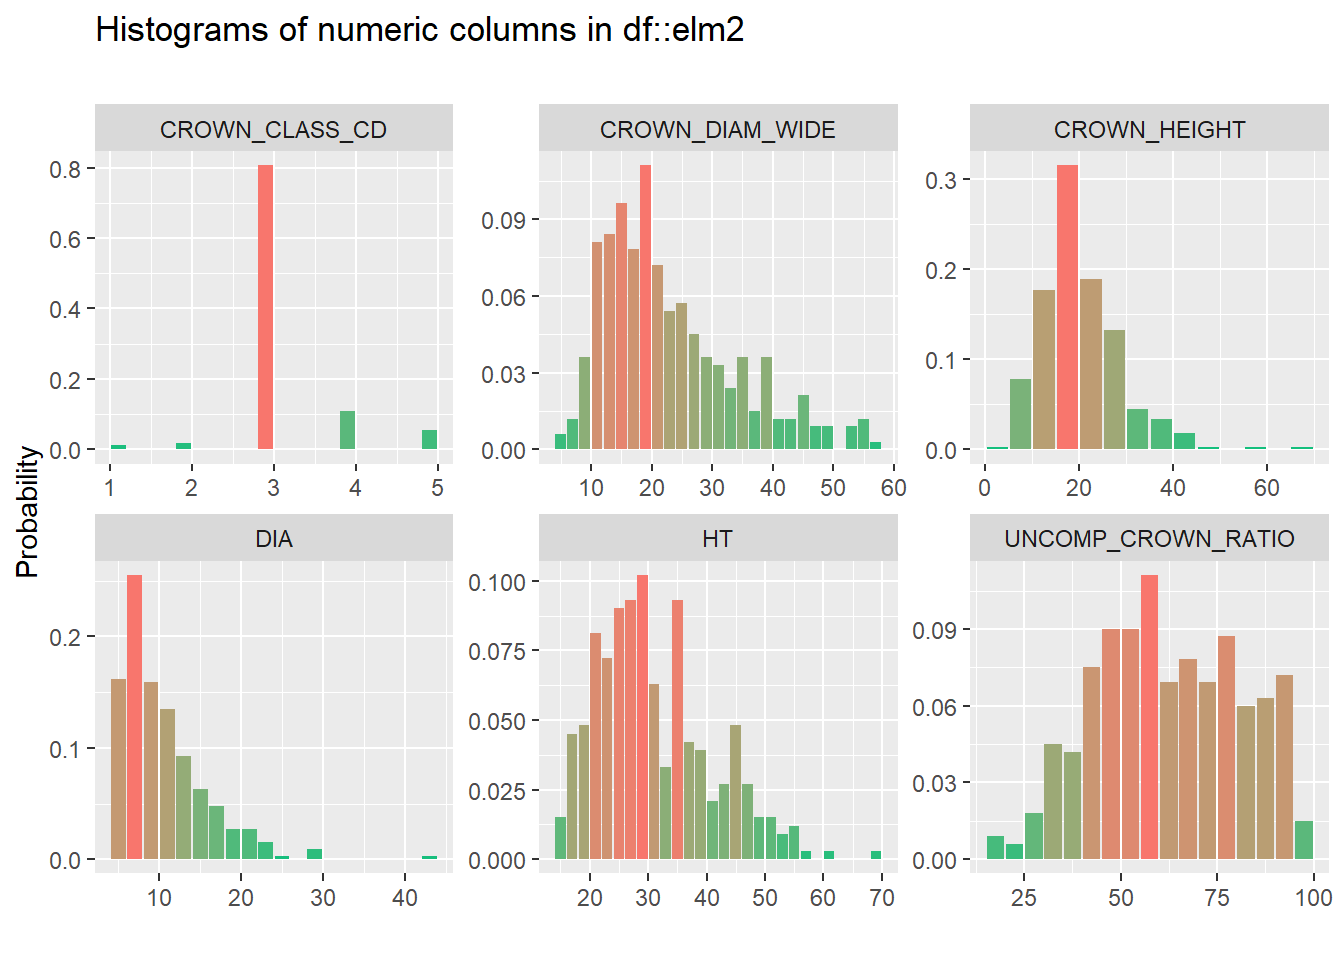 Example figure from the inspect_num() function in the inspectdf package that provides histograms of all numeric variables in the elm data set.